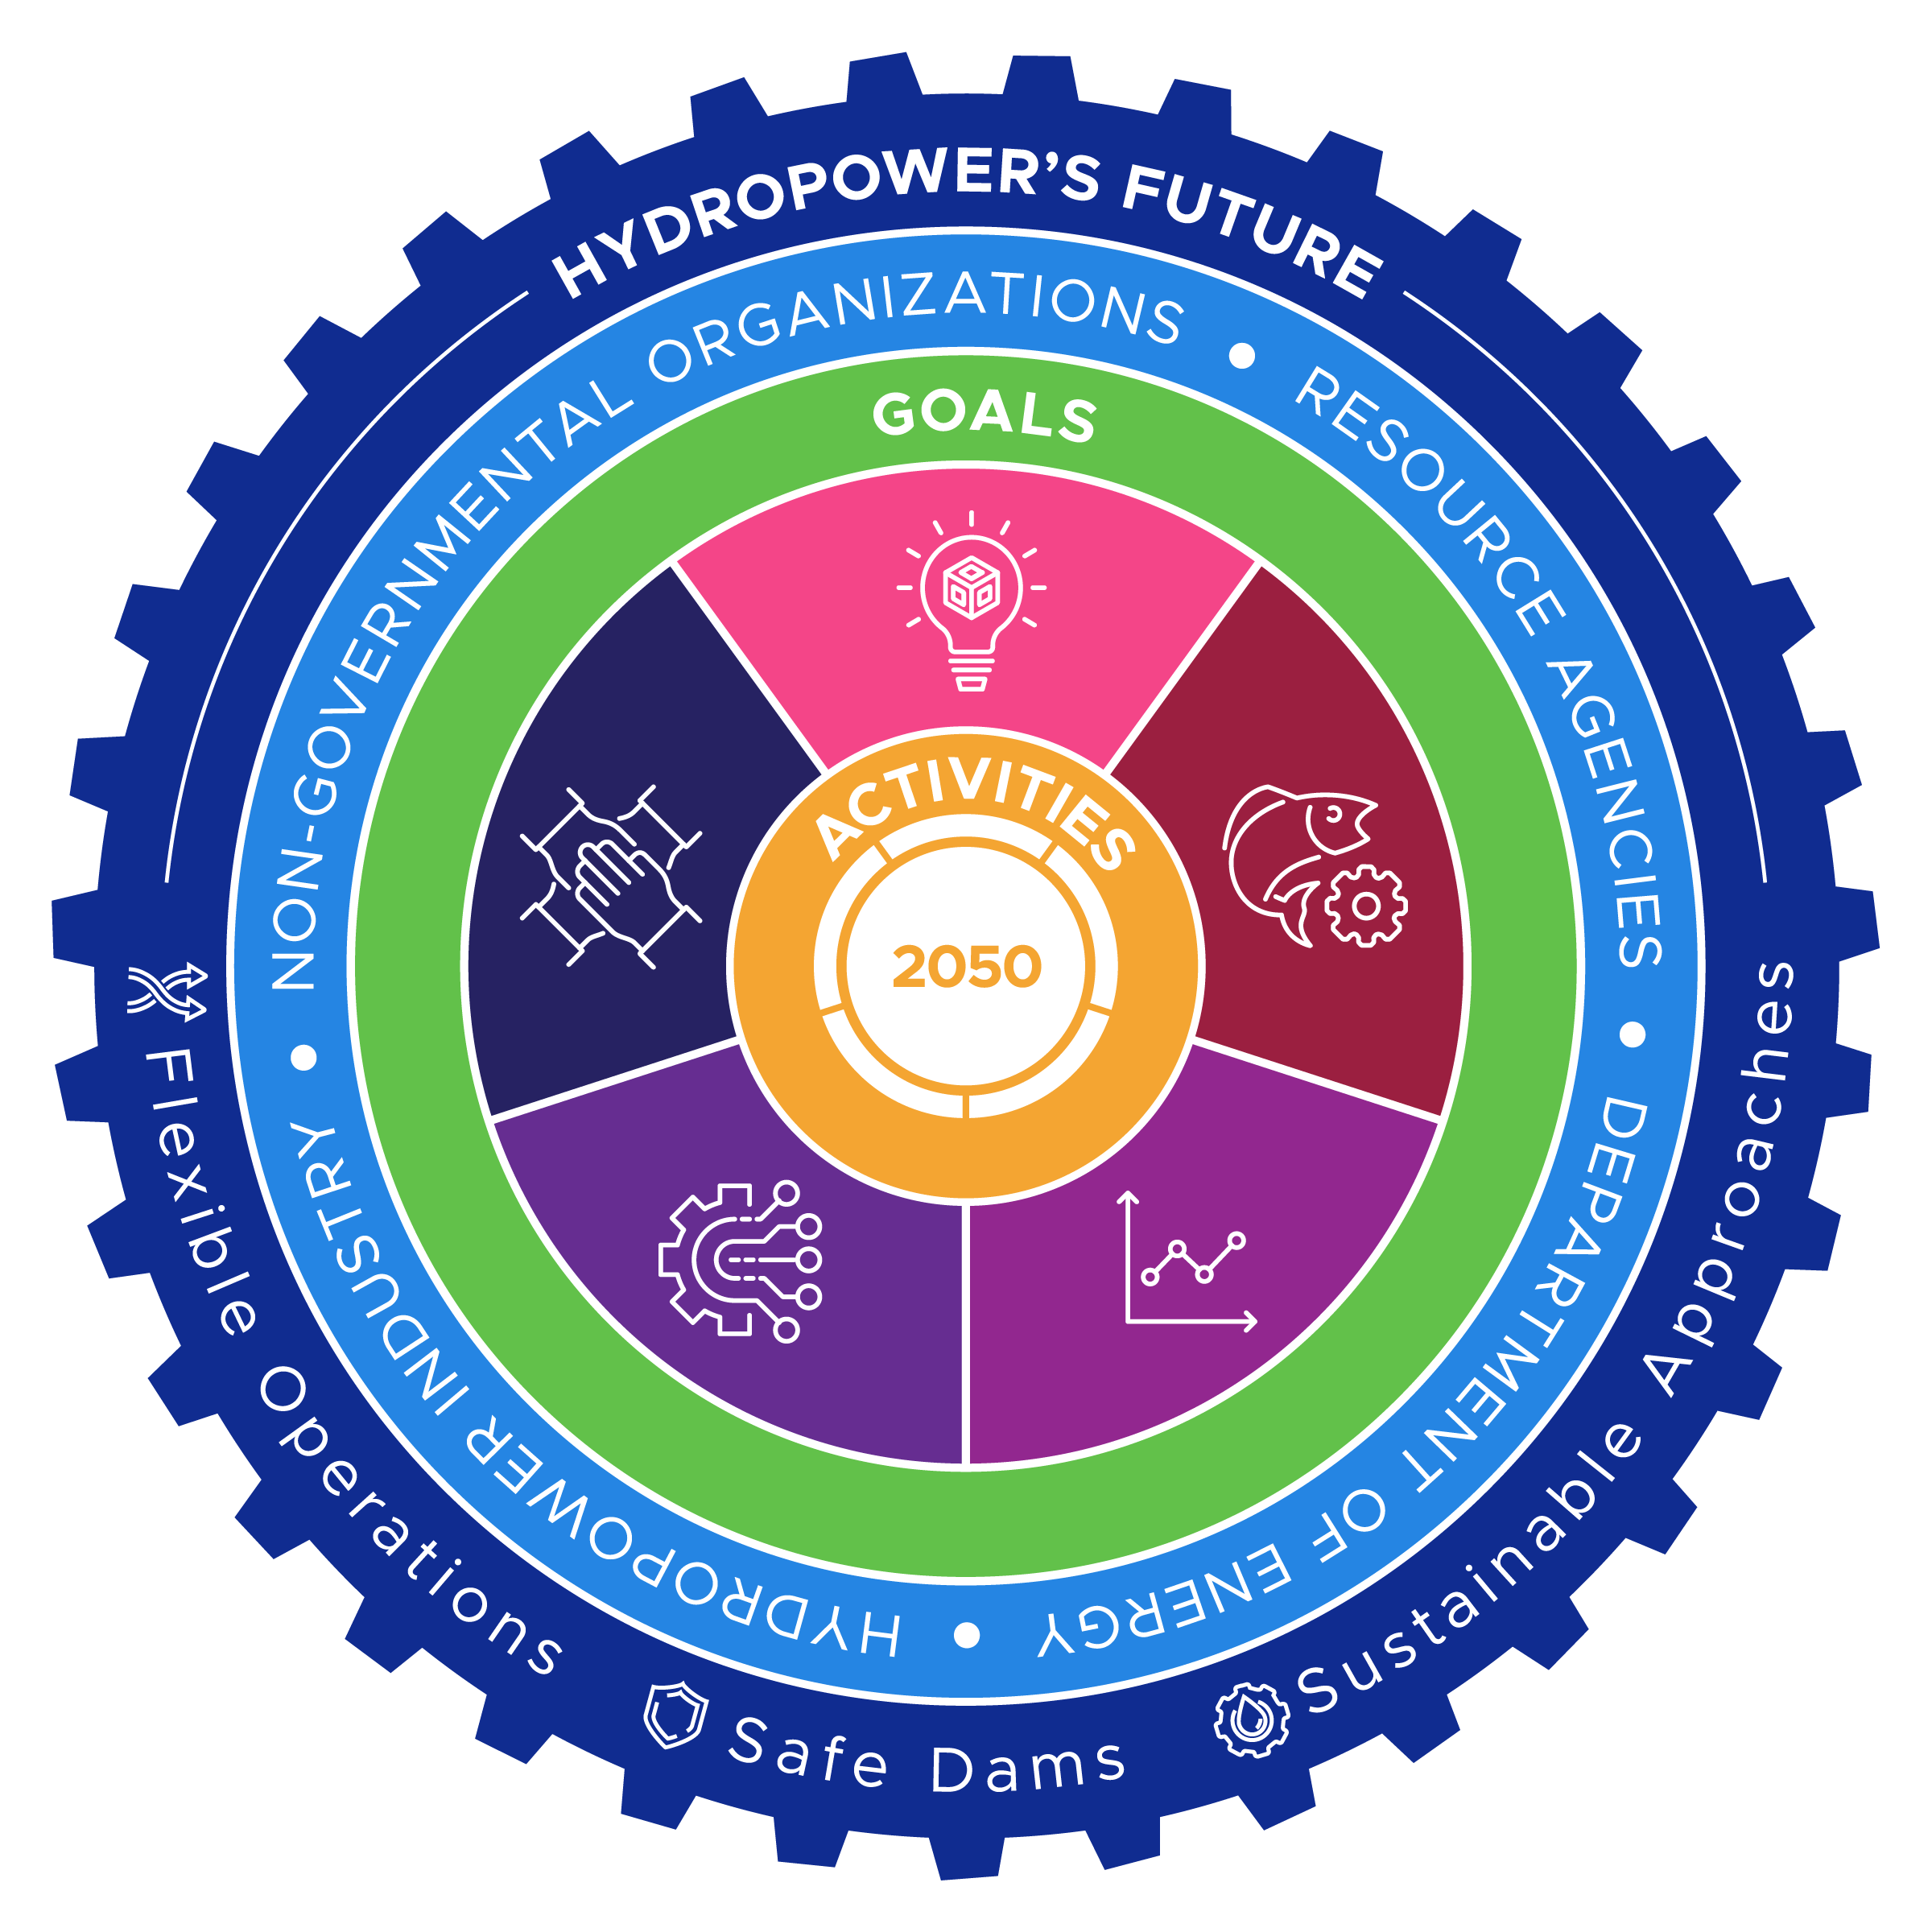 A gear representing all the goals and activities encompassed in the Hydropower Vision Roadmap.